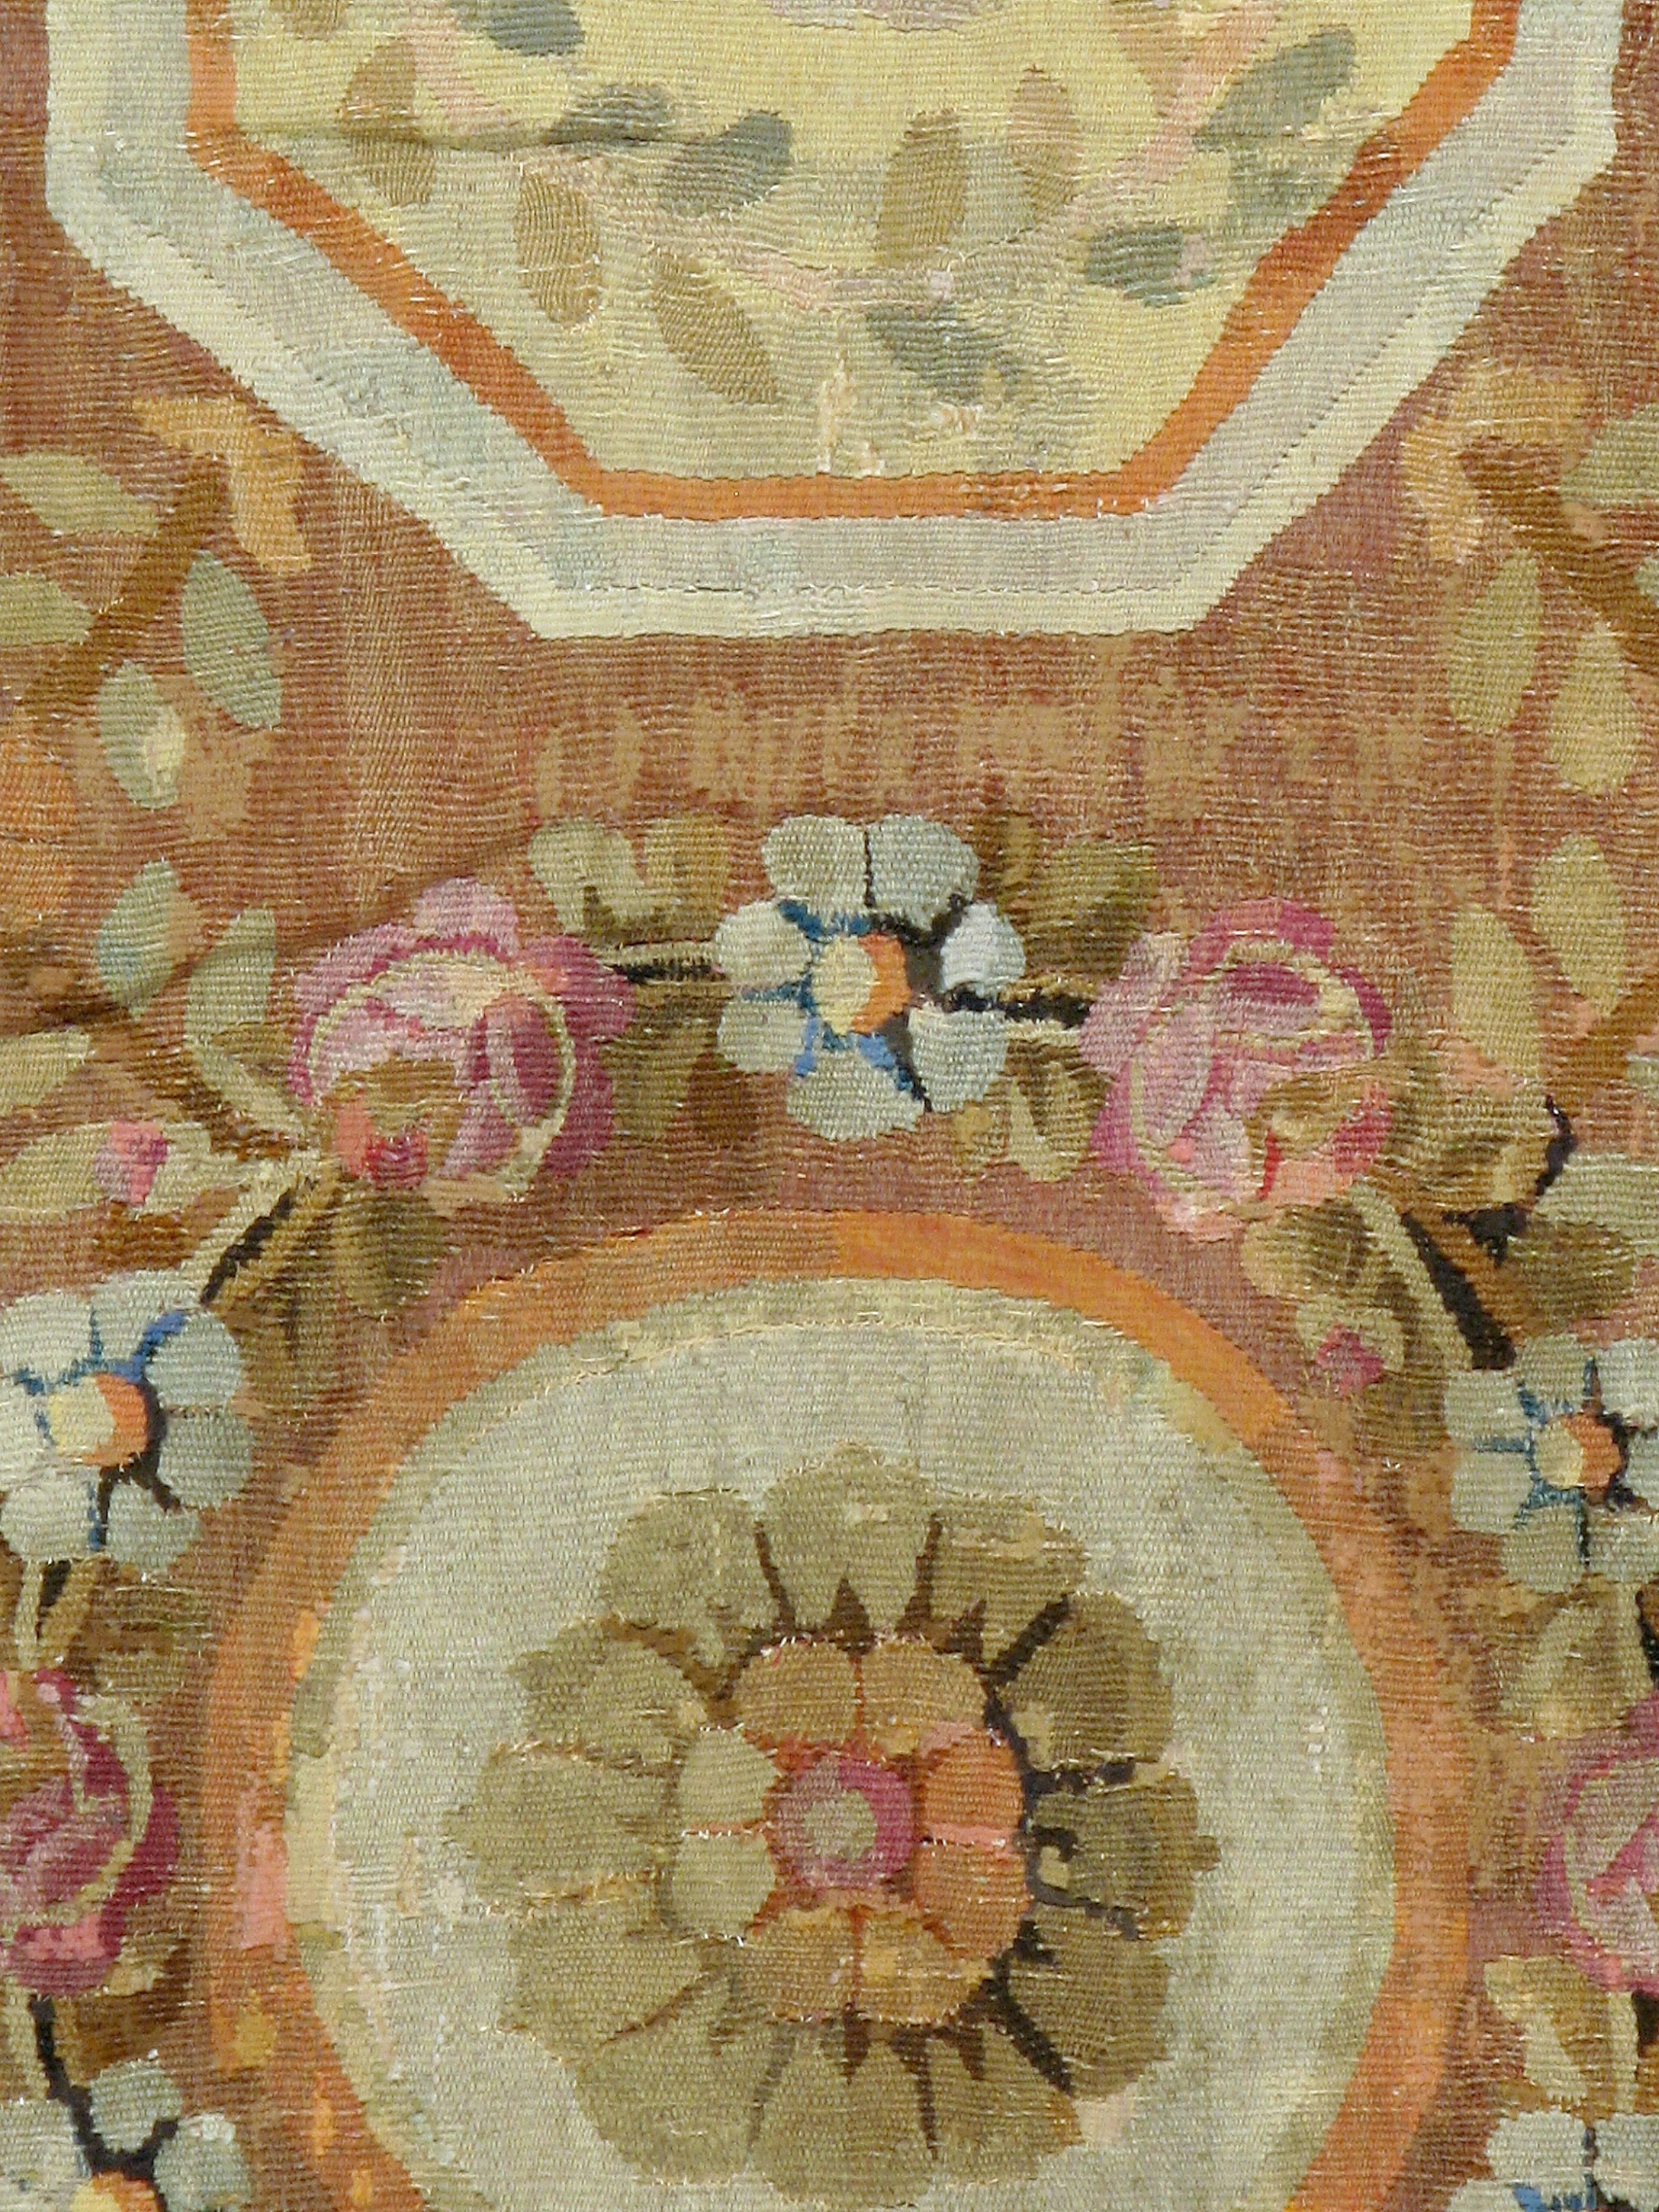 An antique French Aubusson carpet from the late 19th century.

The style of Aubusson tapestries and carpets produced have changed over the centuries because of its war-ridden history. There is no official date on how far back Aubusson’s are